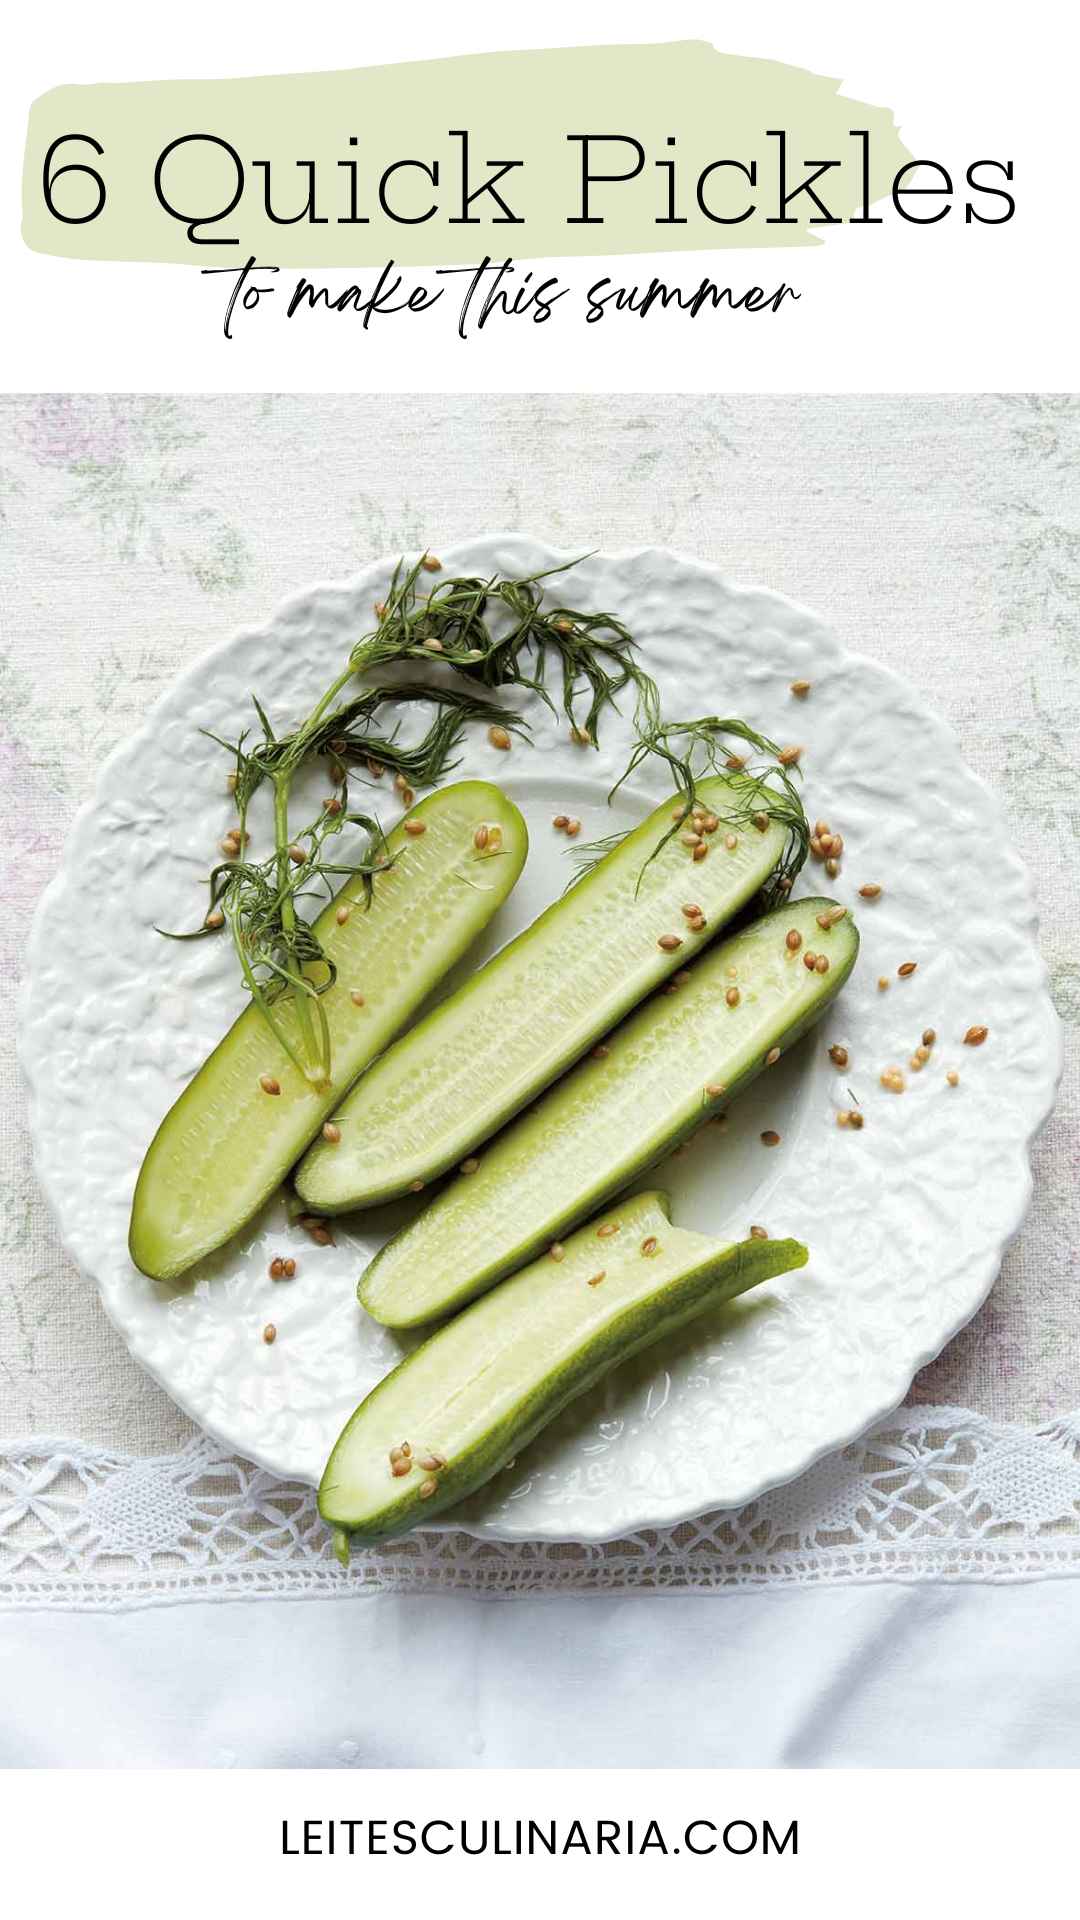 Four dill pickles on a plate.